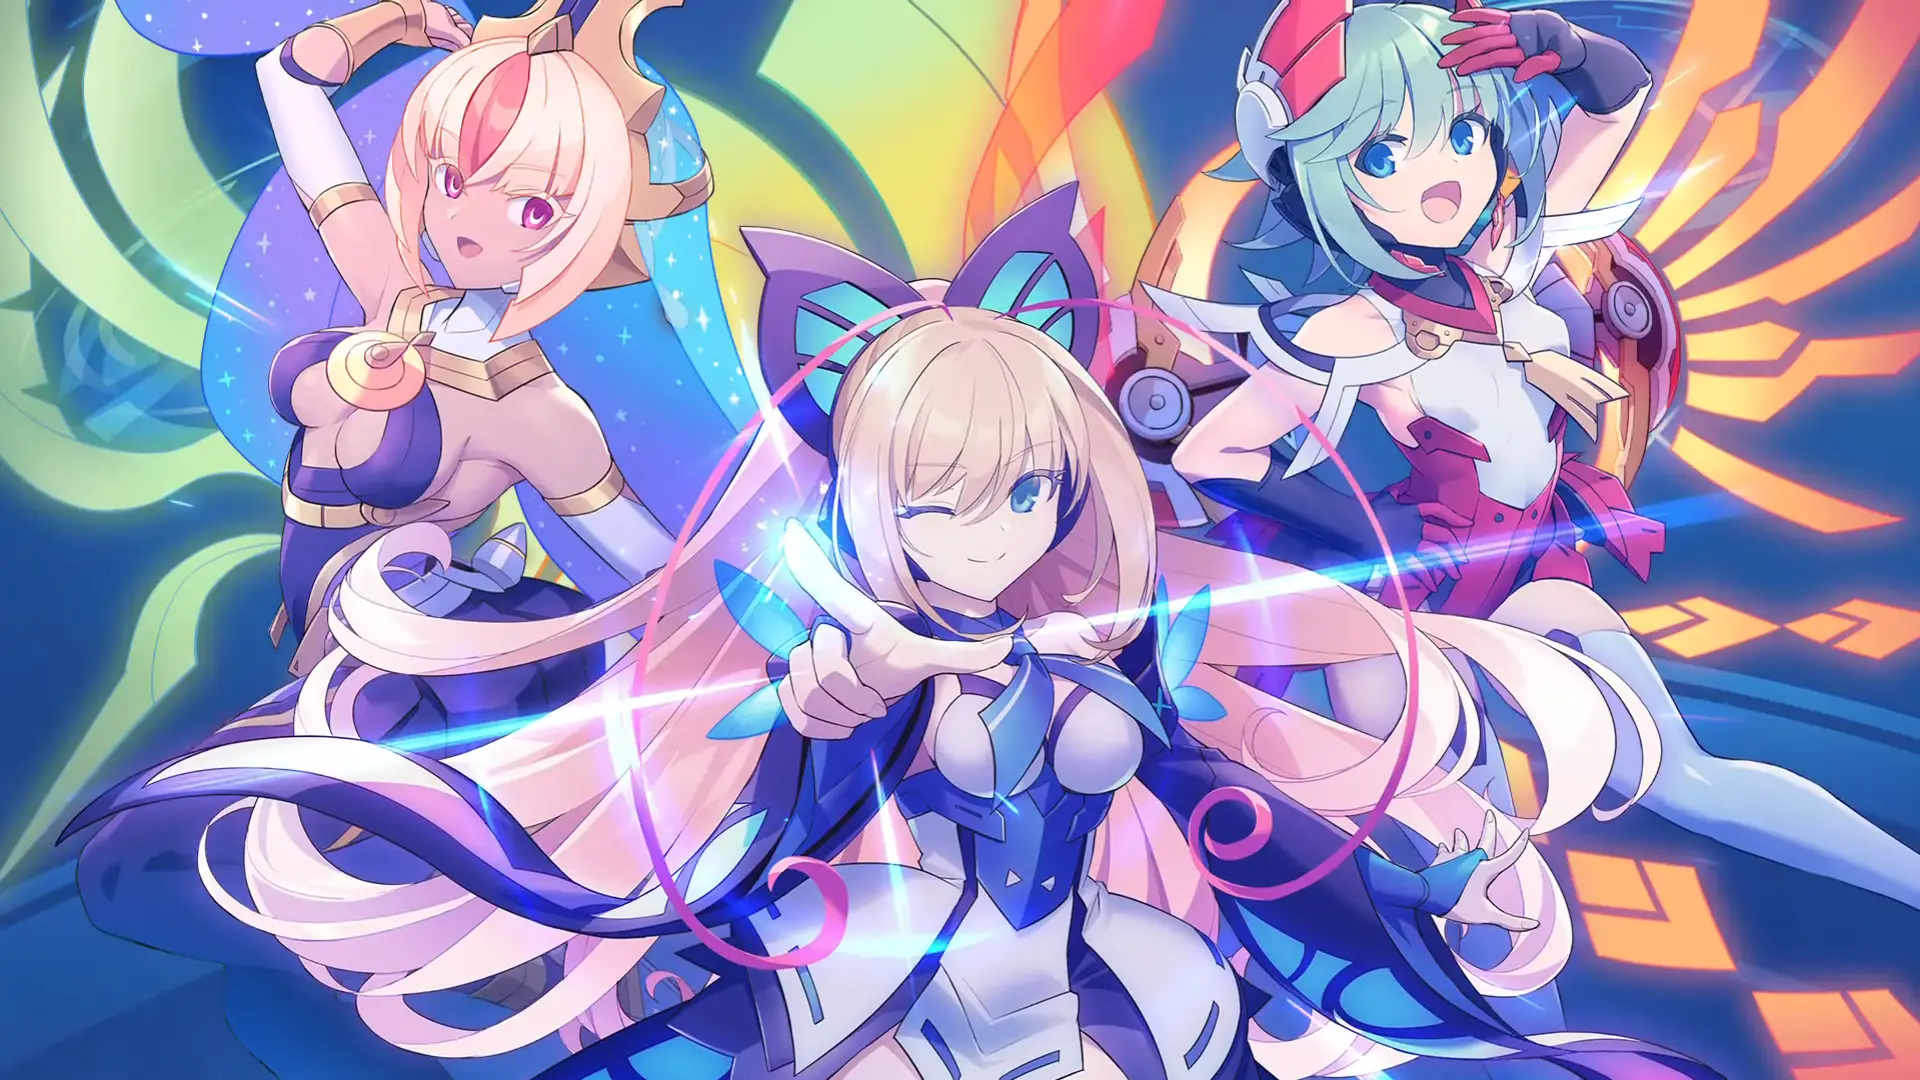 Gunvolt Records: Cychronicle Removed from Switch eShop Temporarily “Due to a Change in Ratings”